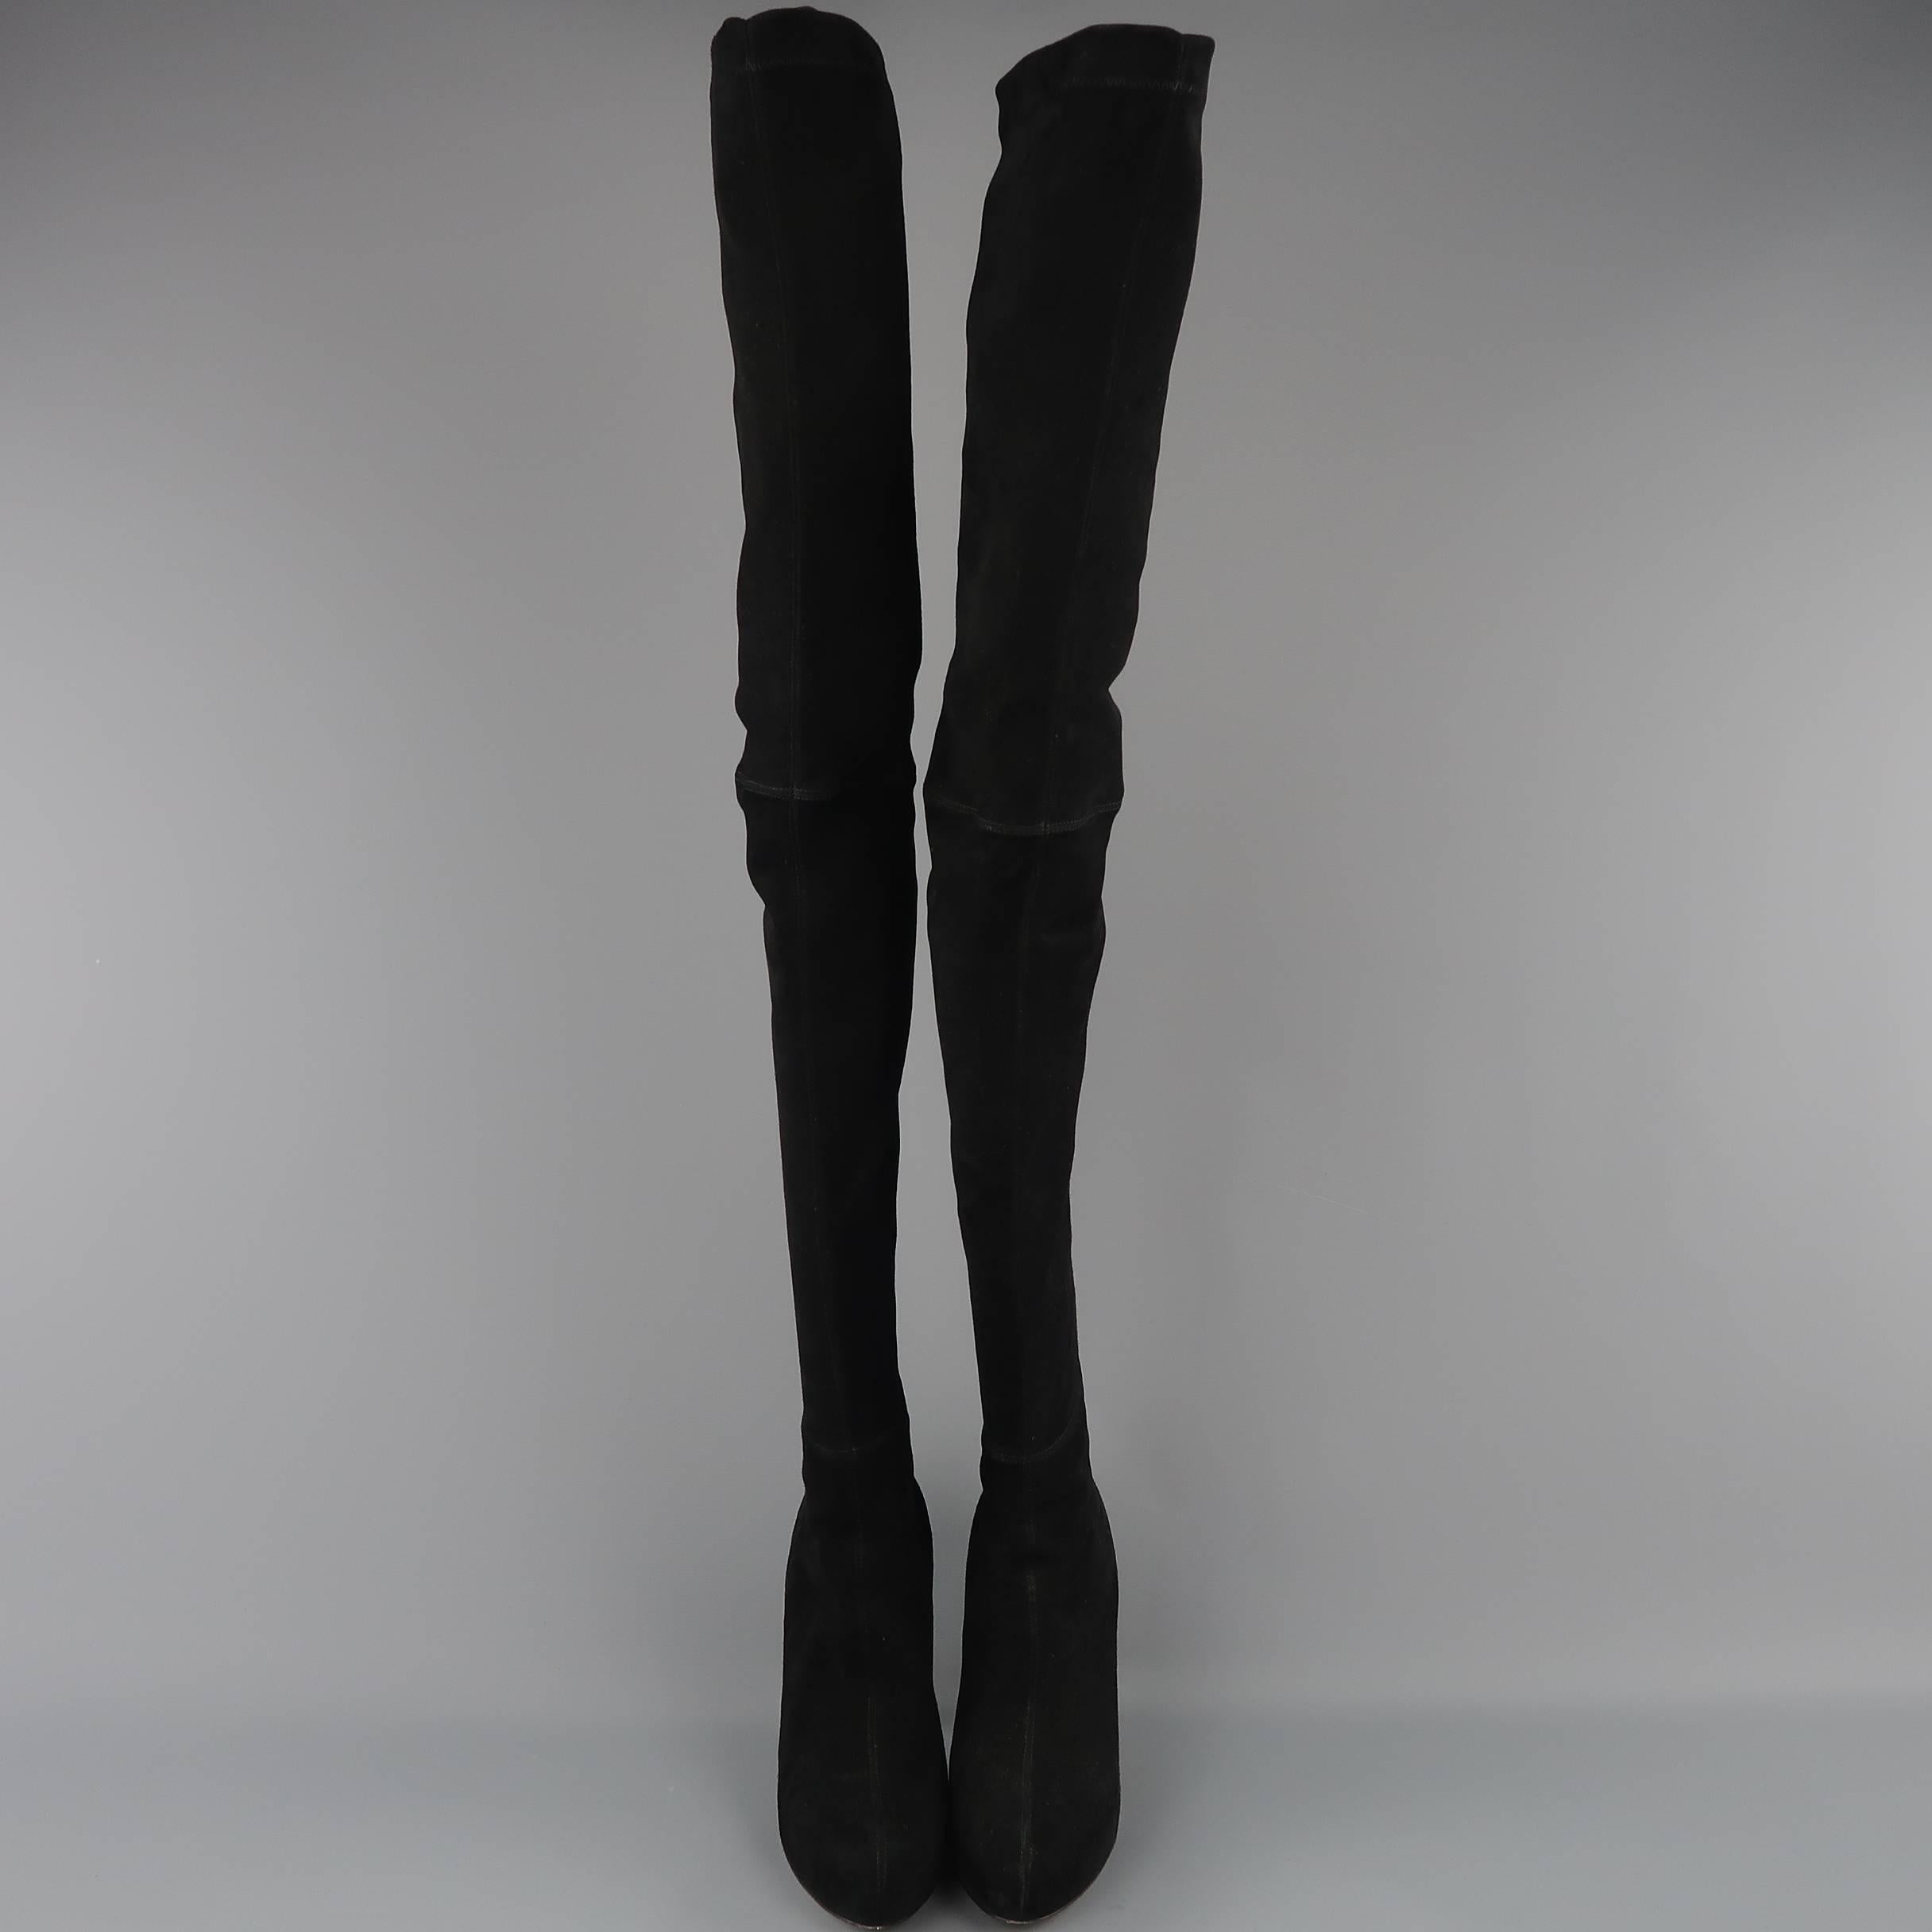 Women's BRIAN ATWOOD Size 8.5 Black Suede Thigh High Platform Boots